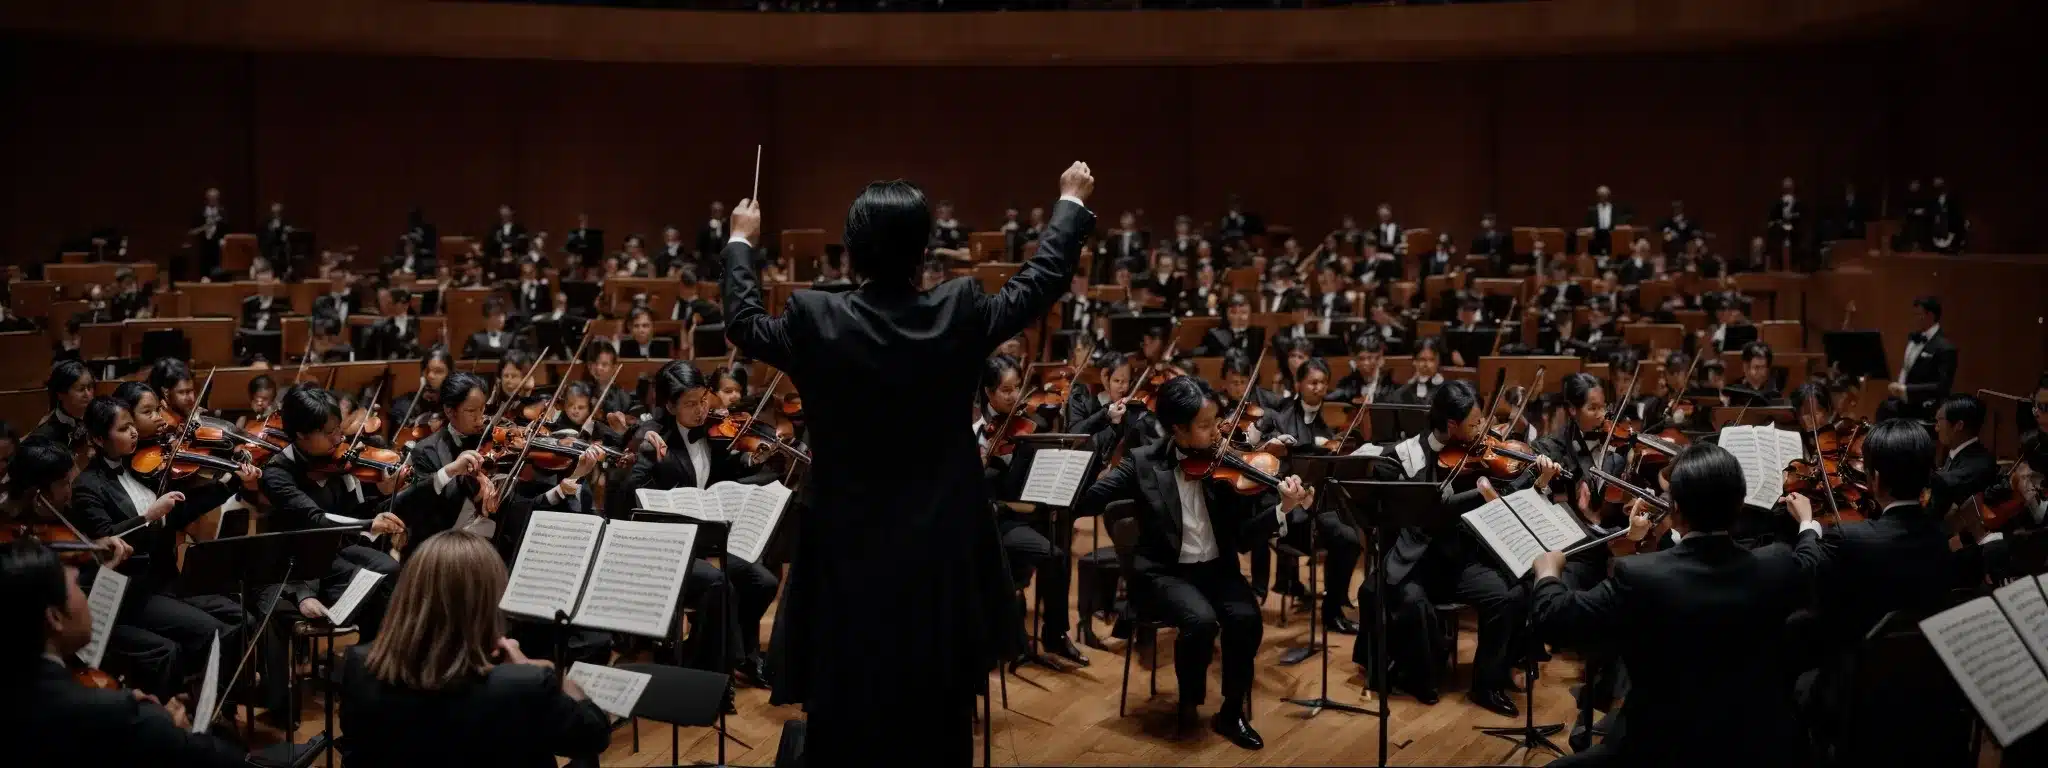 A Conductor With A Baton Stands Before An Engaged Orchestra During A Captivating Performance.